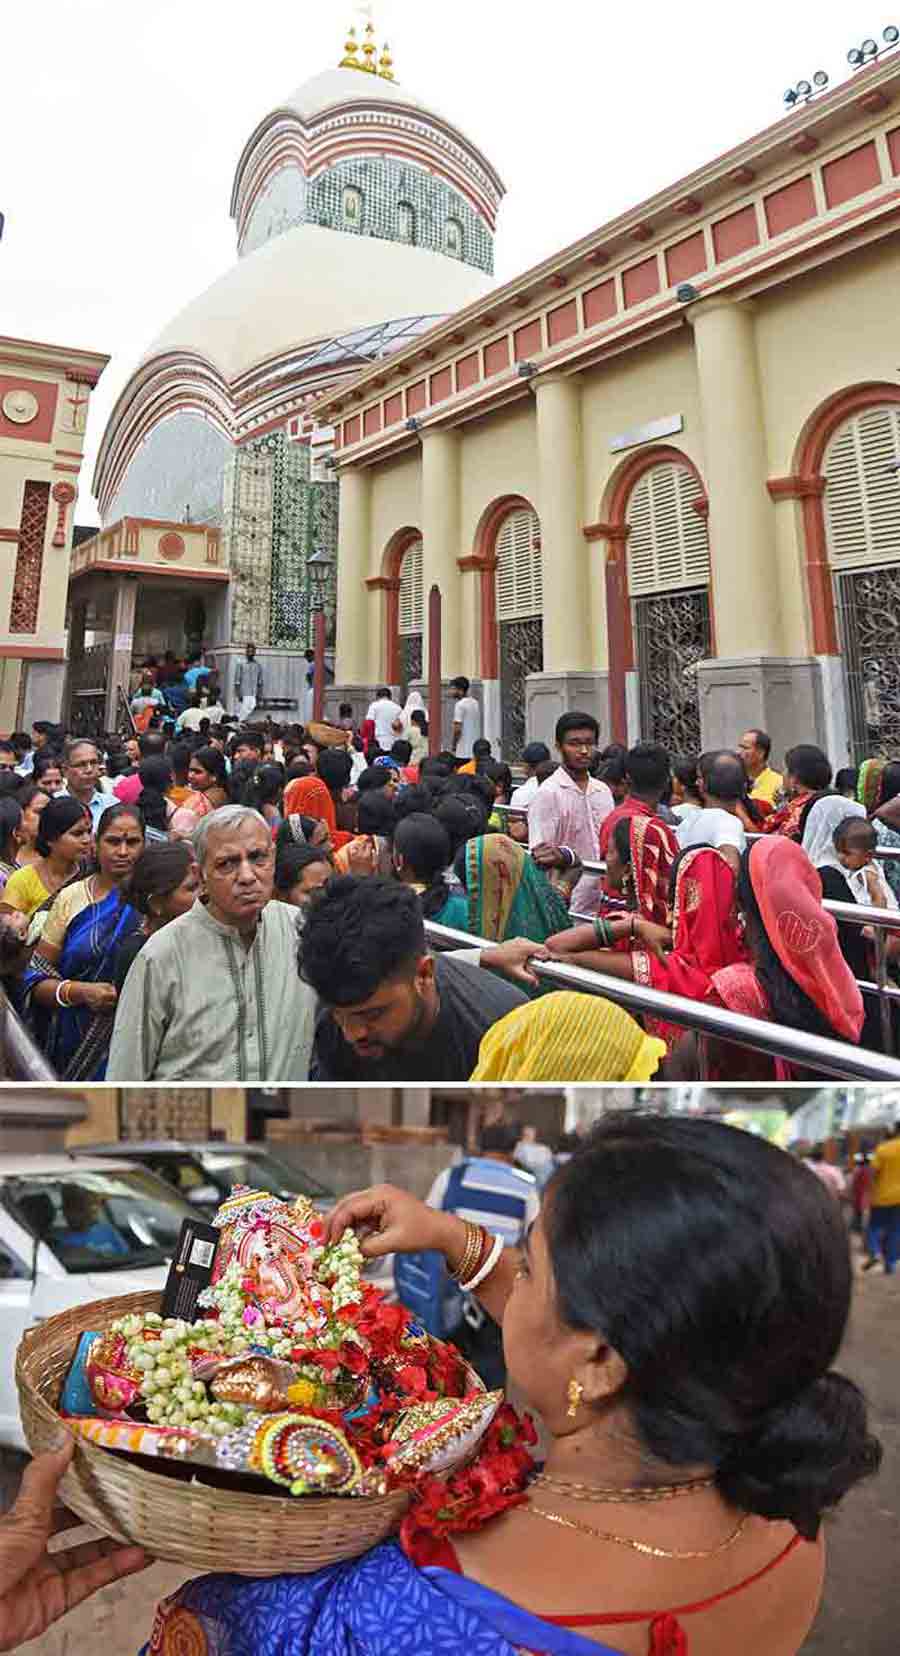 People queue up at Kalighat temple to offer puja on Akshay Tritiya and (above) a woman balances an idol of Lord Ganesh and several garlands after performing puja at the temple  